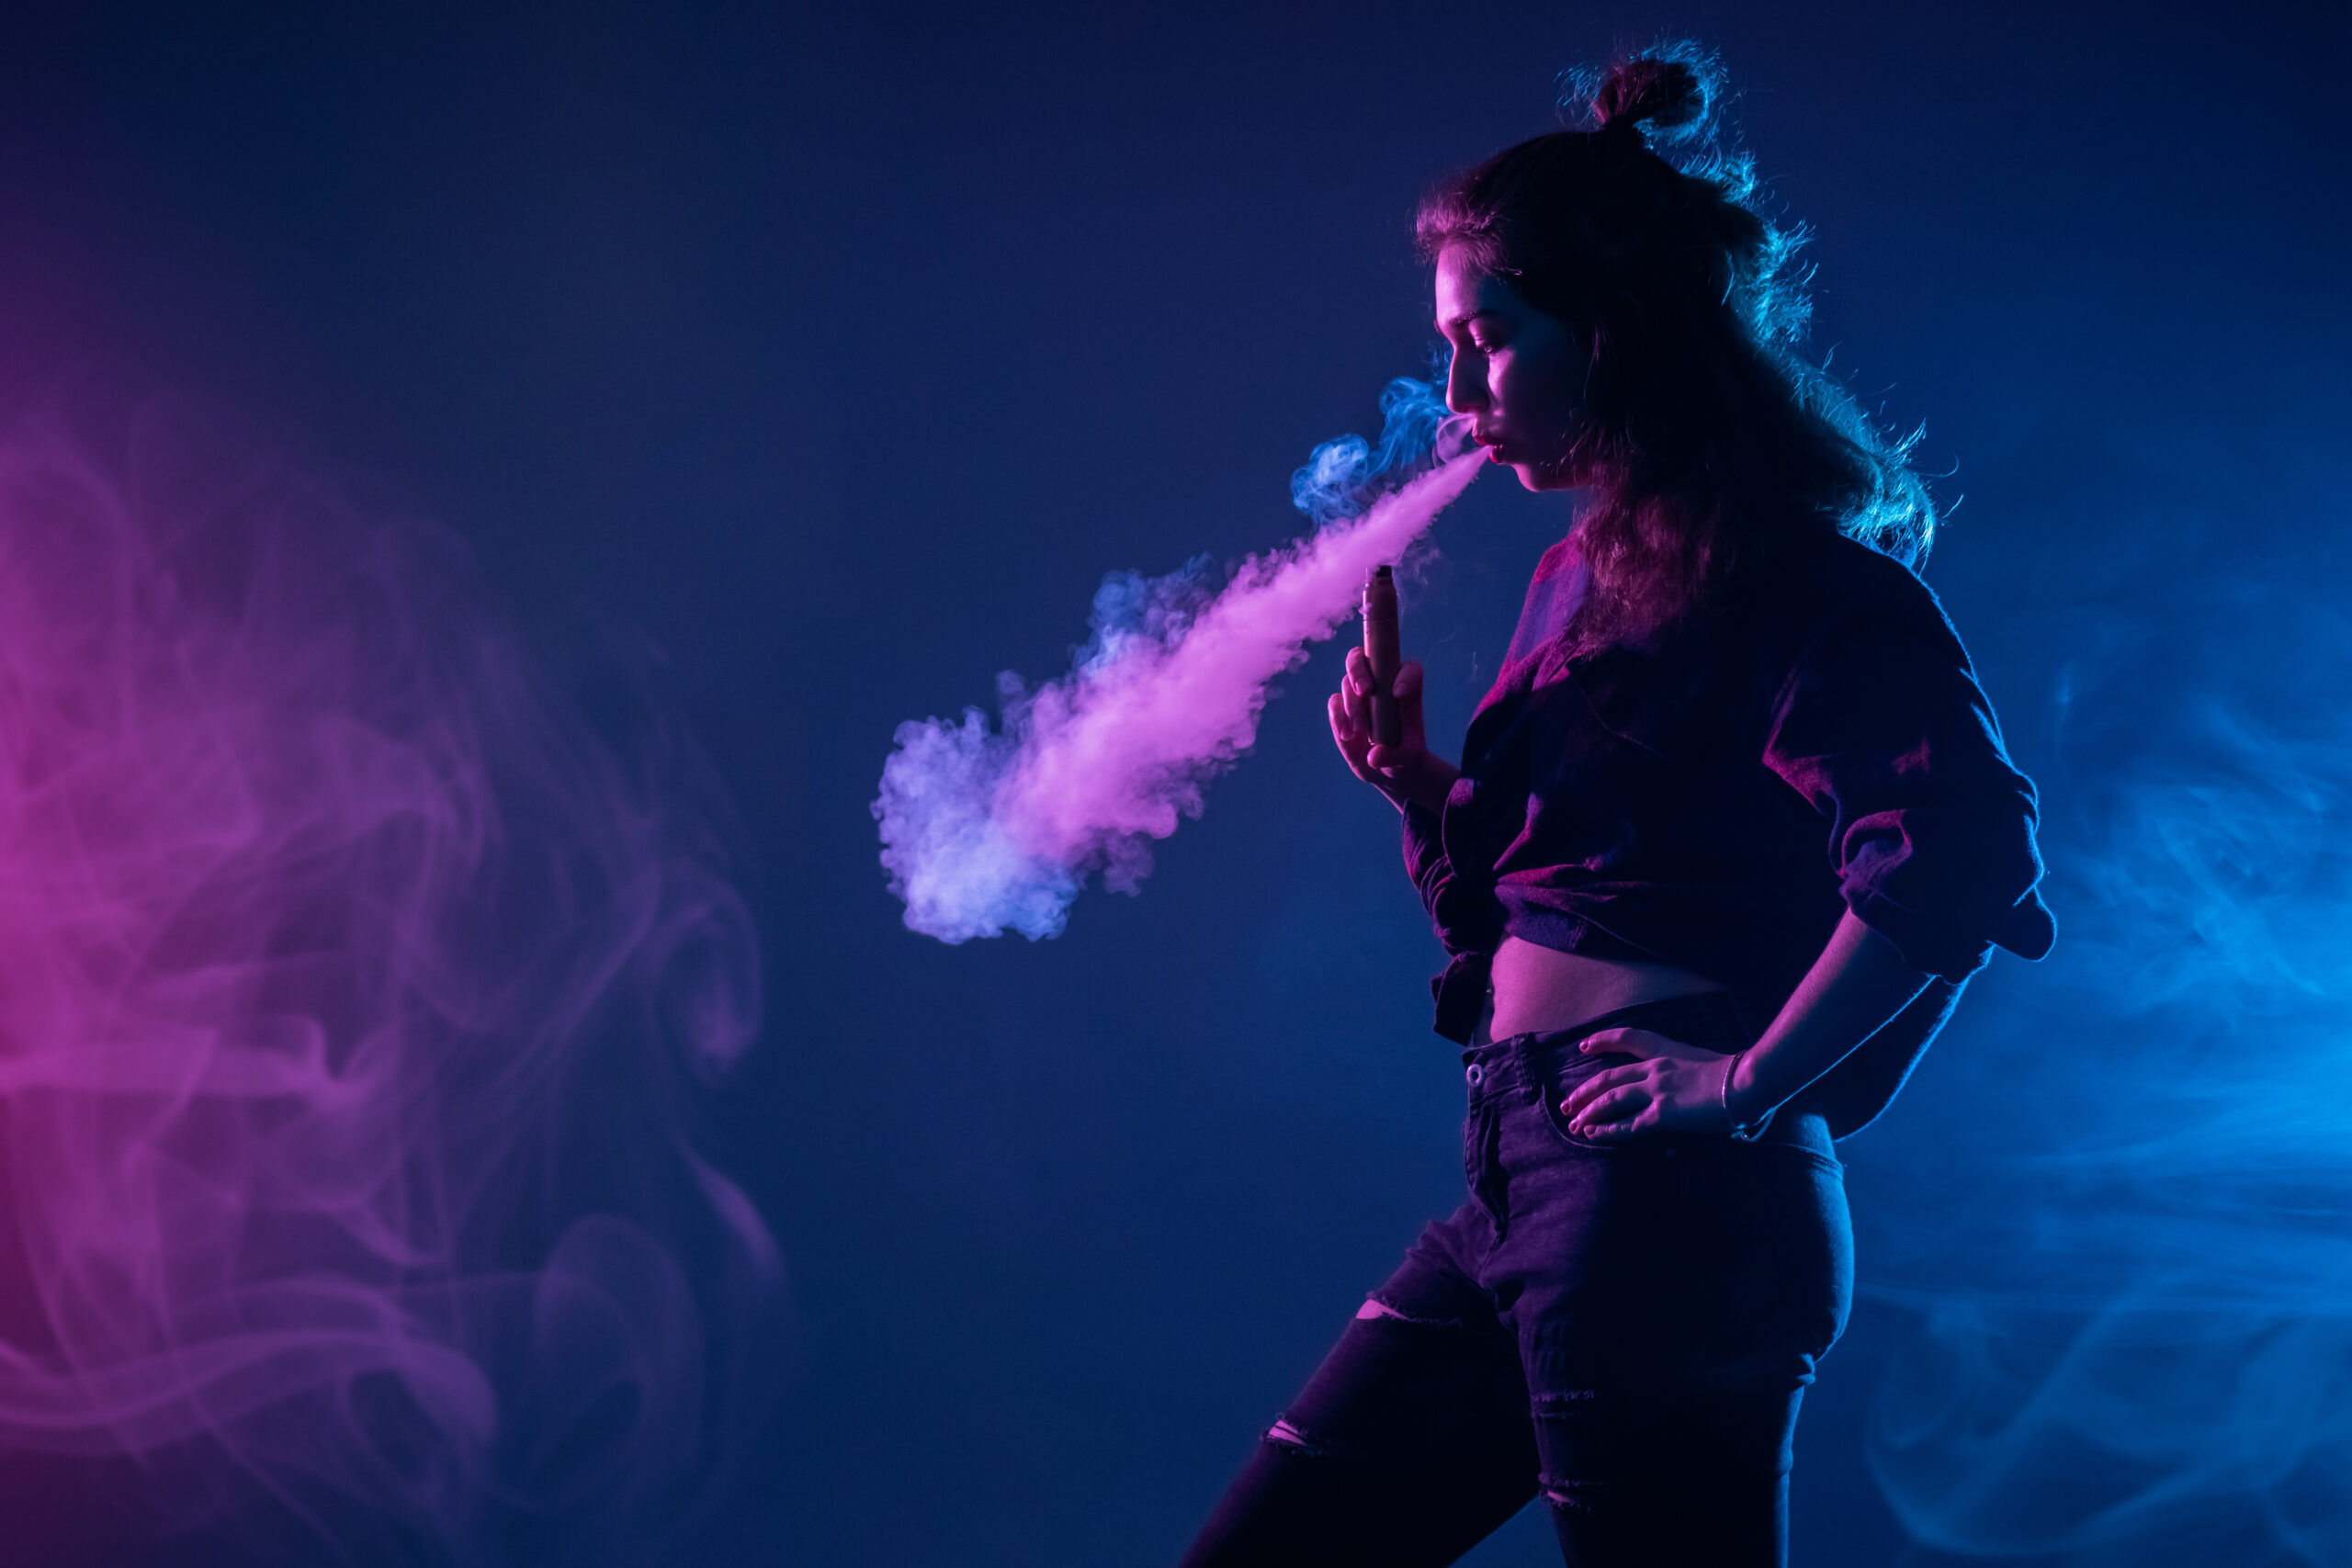 A young brunette woman in a black cut-off shirt and jeans blows out smoke while holding an electronic vape device in her hand. The light upon her is blue and purple.